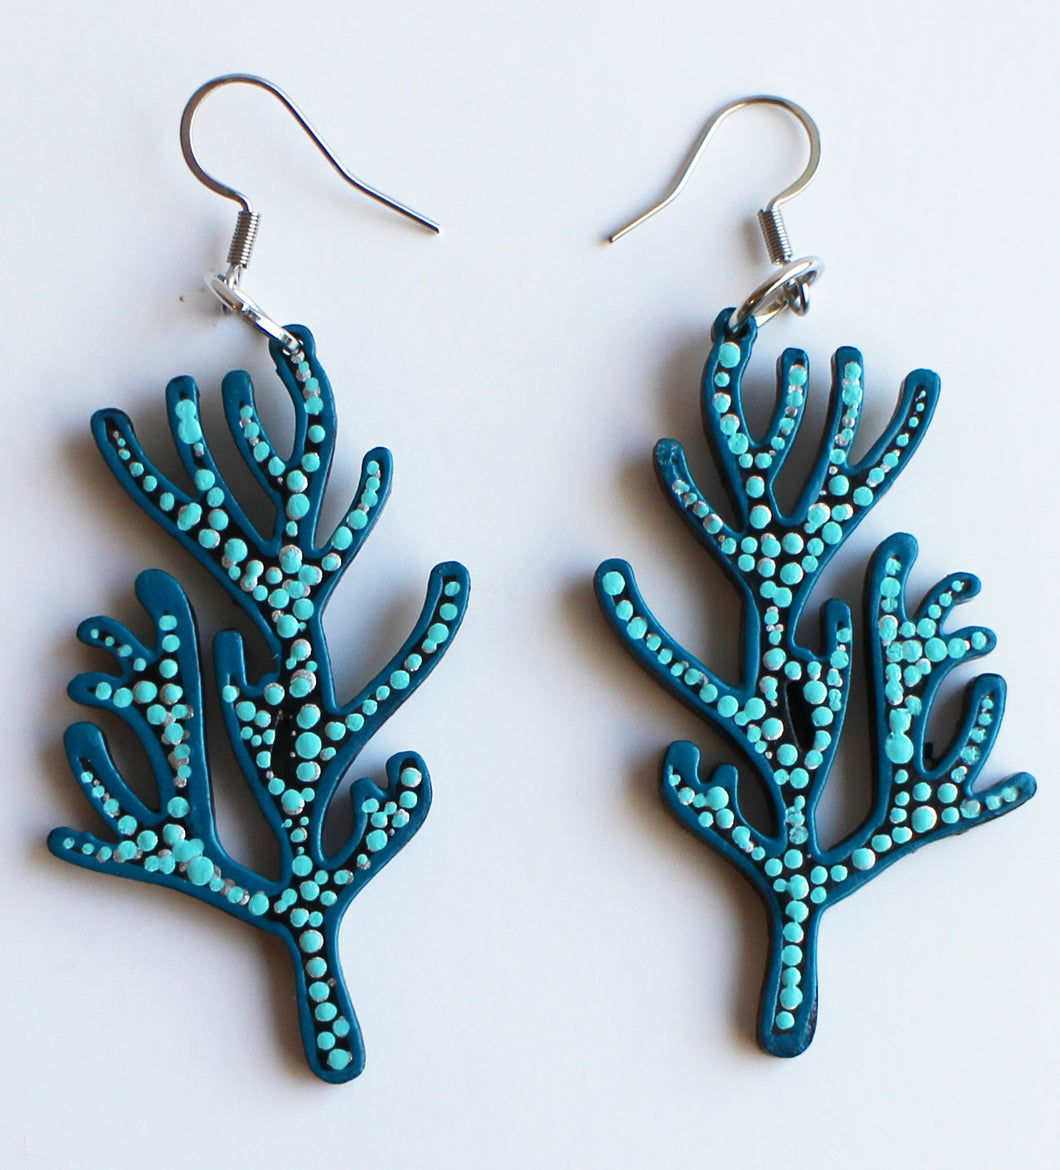 Dark Blue and Light Blue Hand Painted Wooden SeaCoral Earrings